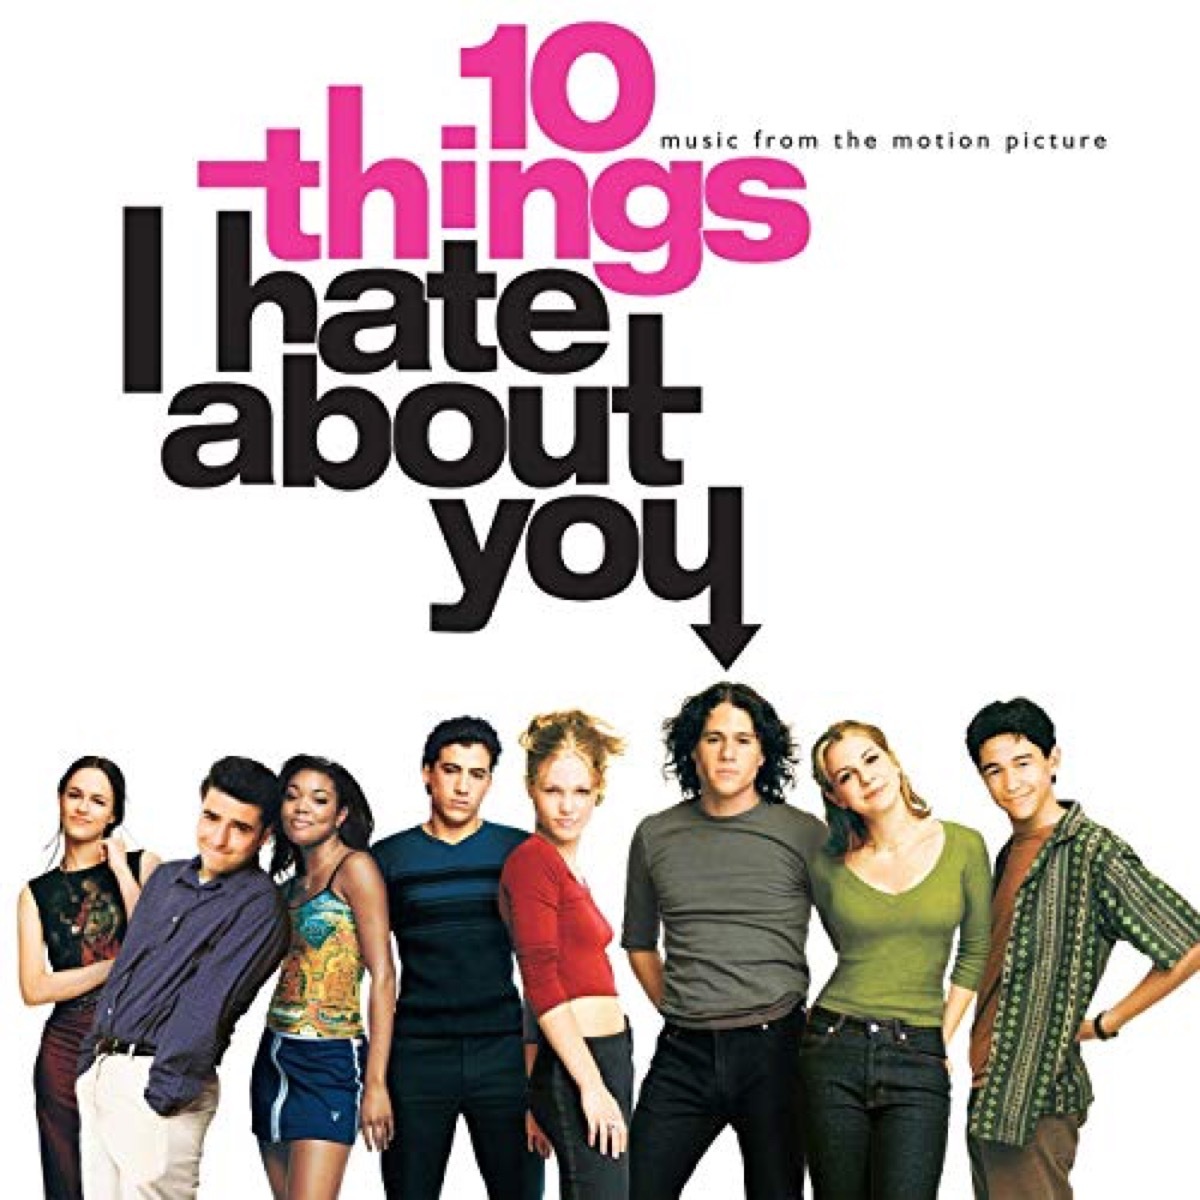 10 things I hate about you movie soundtrack